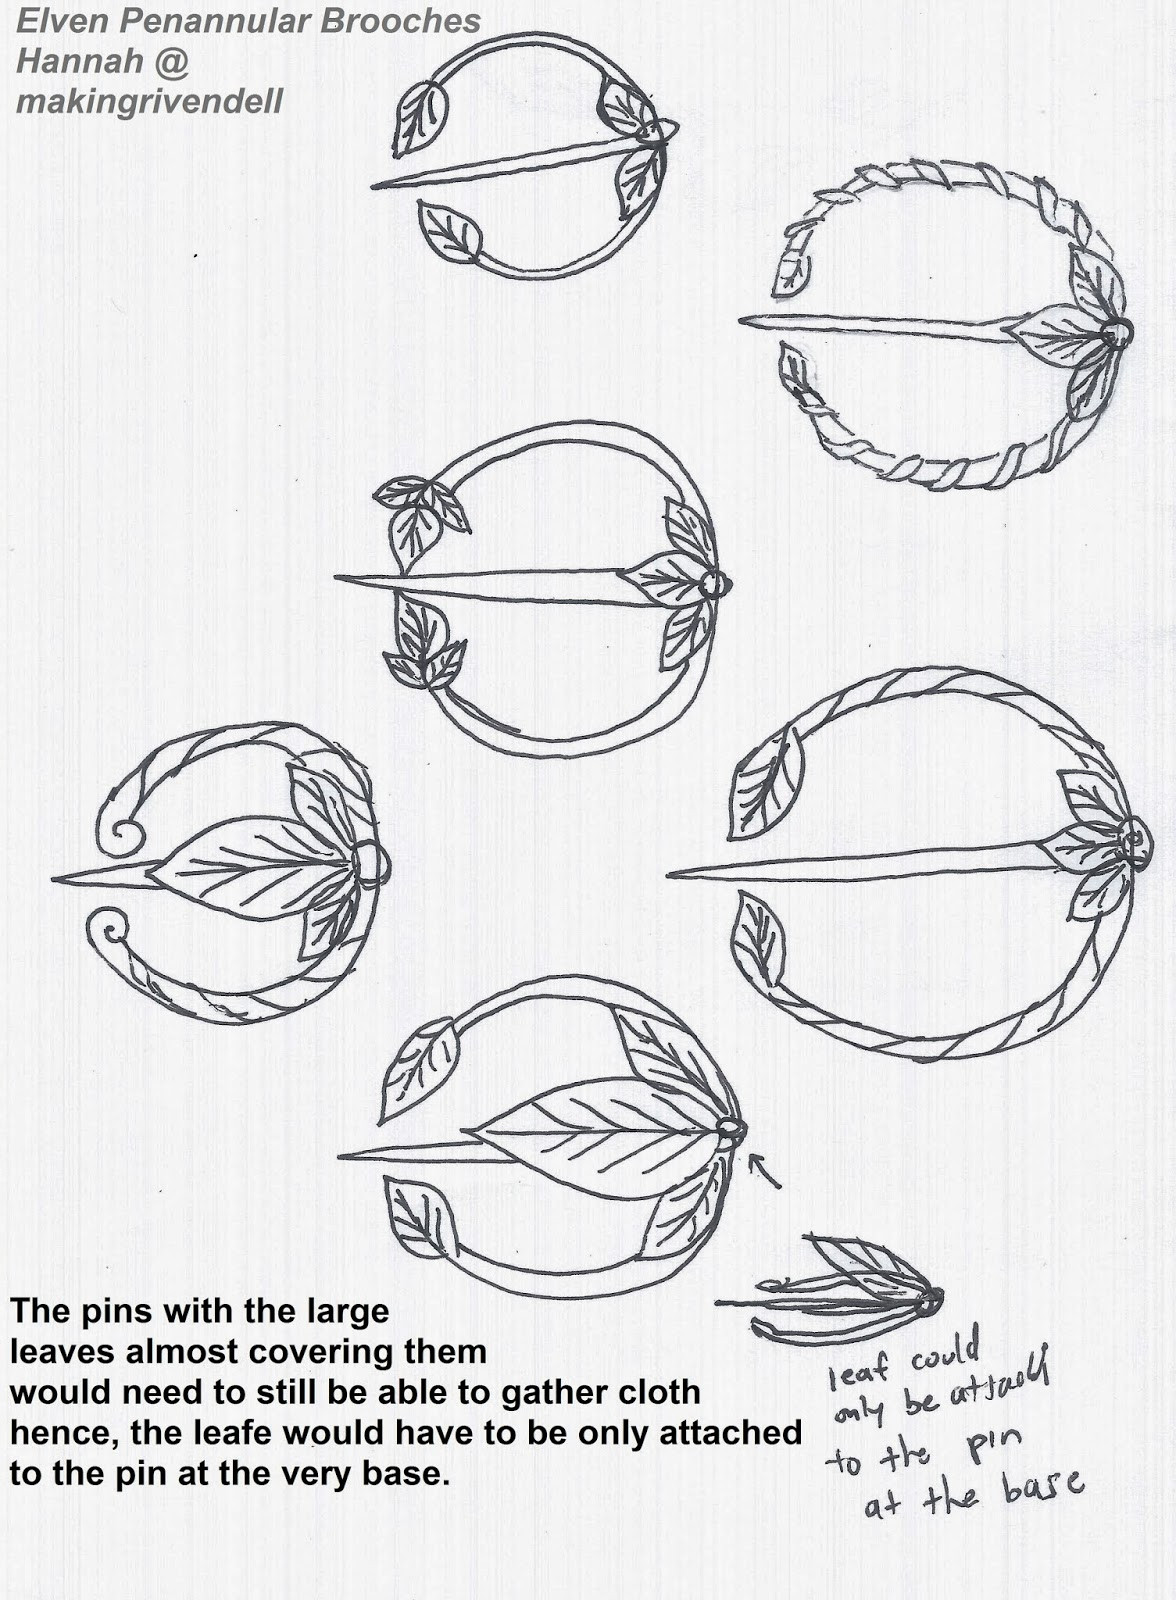 Brooches Drawing
 Making Rivendell in the Desert Elven Penannular Brooches